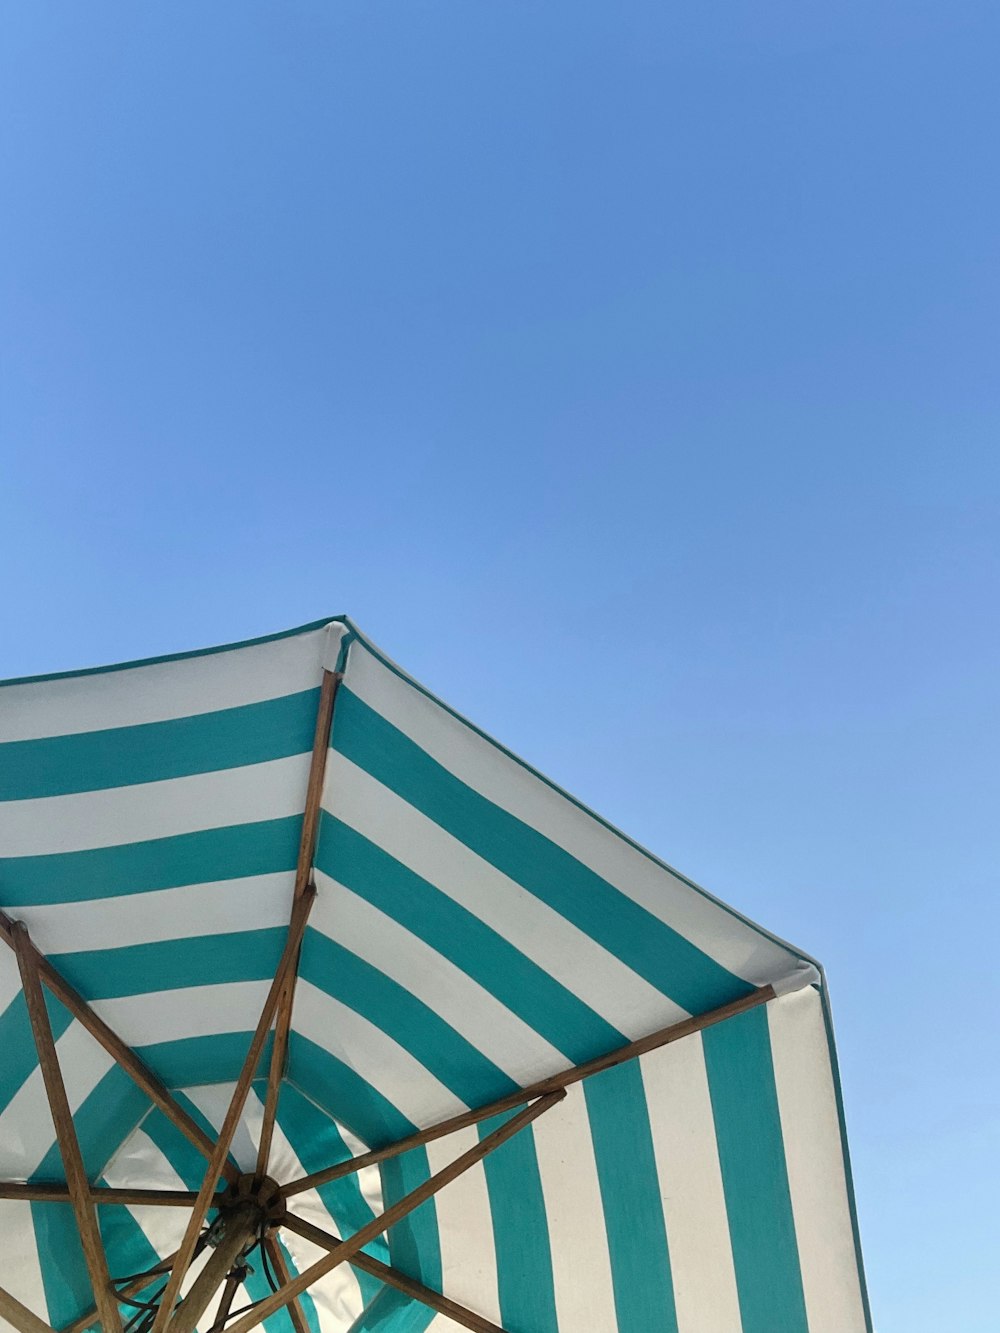 white and teal striped umbrella under blue sky during daytime